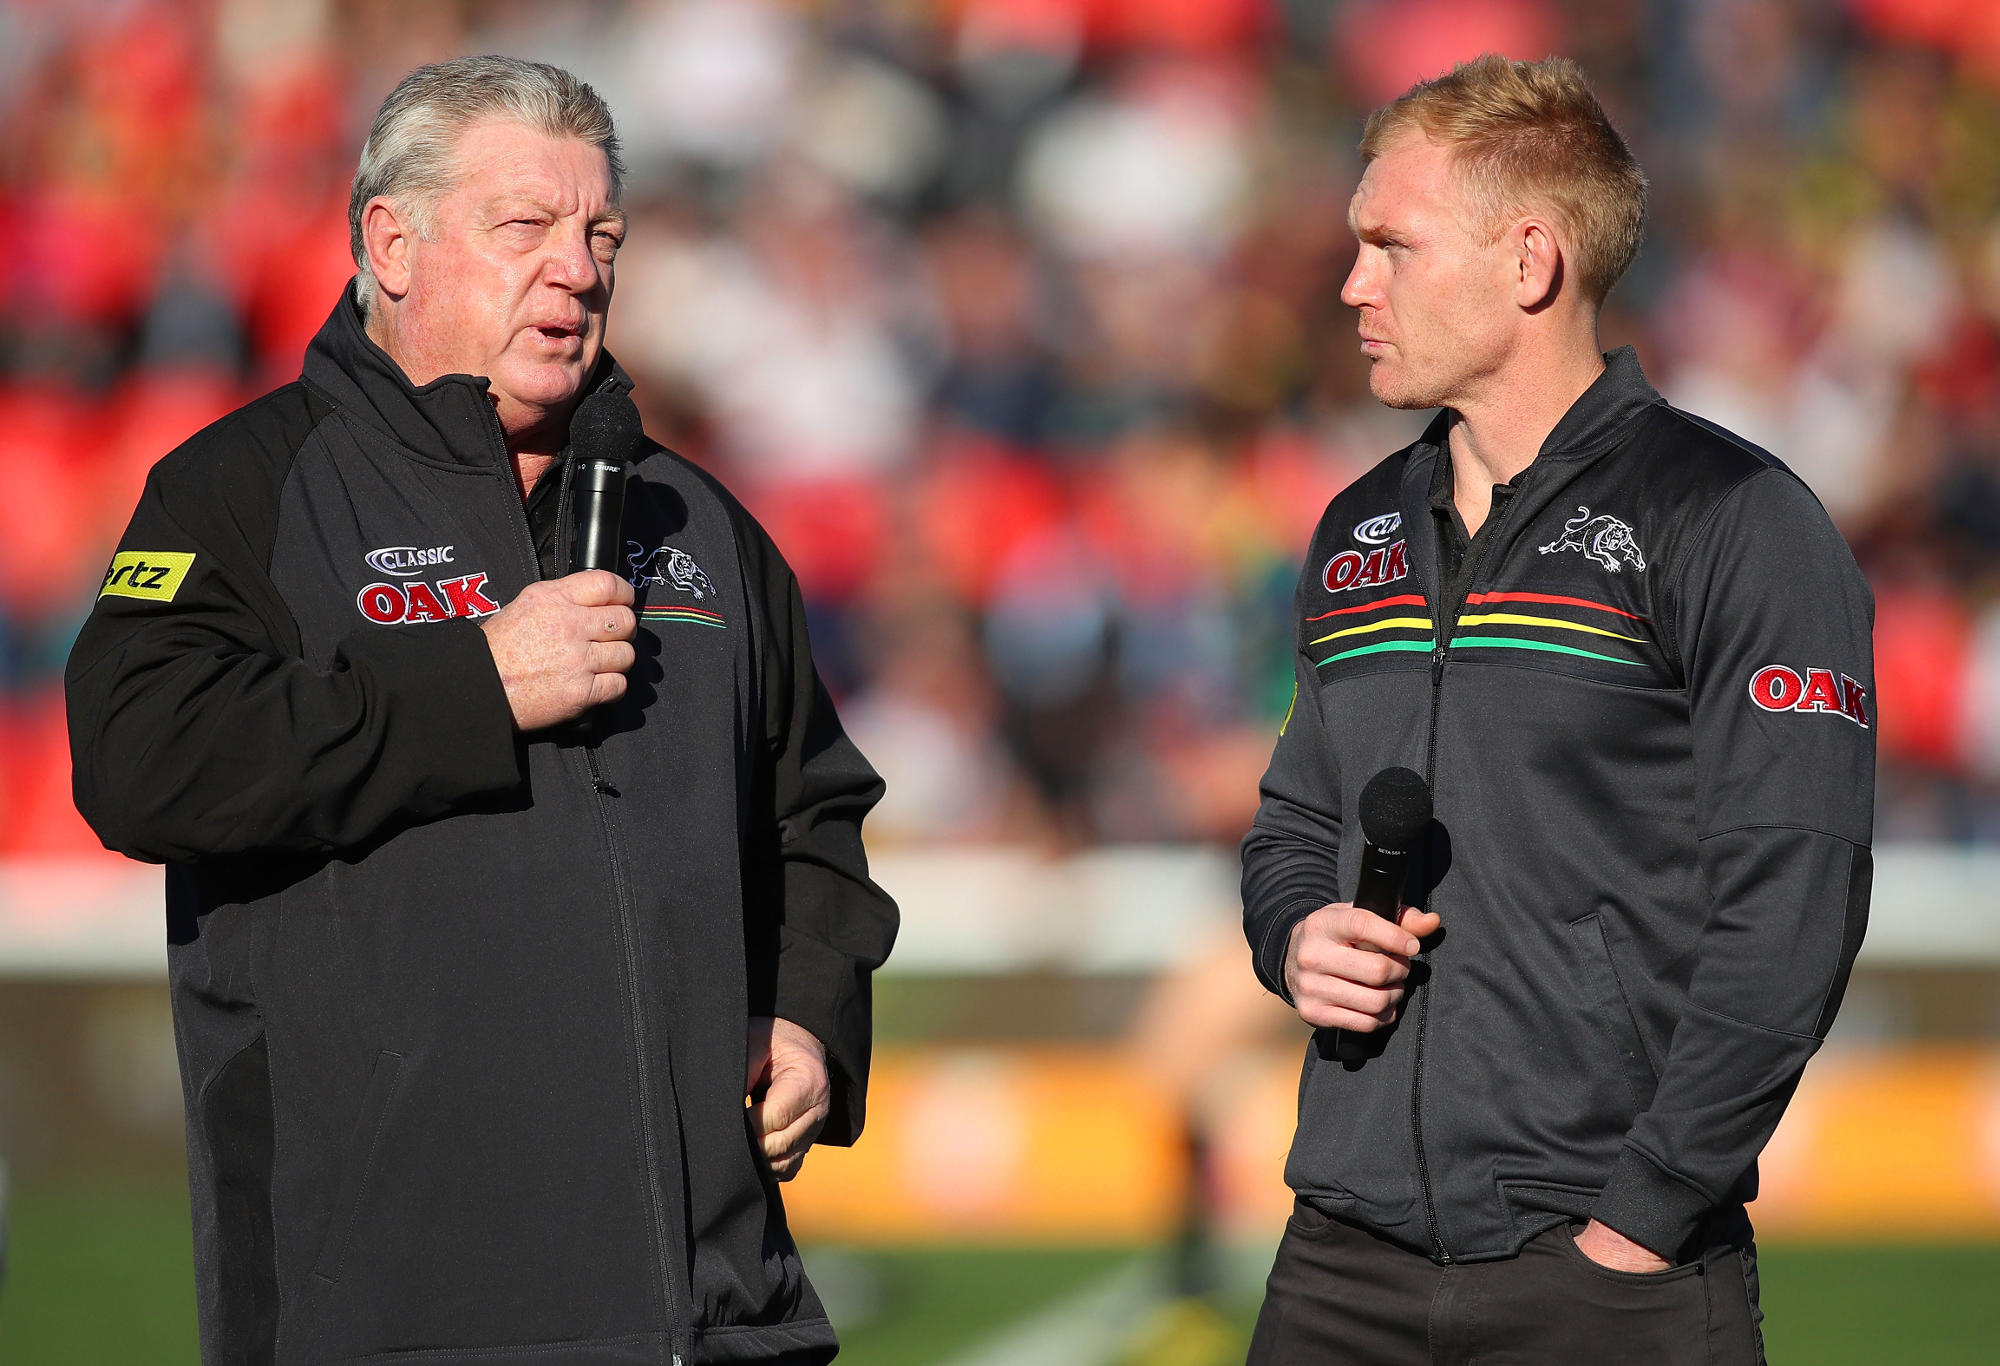 Phil Gould talks with Peter Wallace on the field.